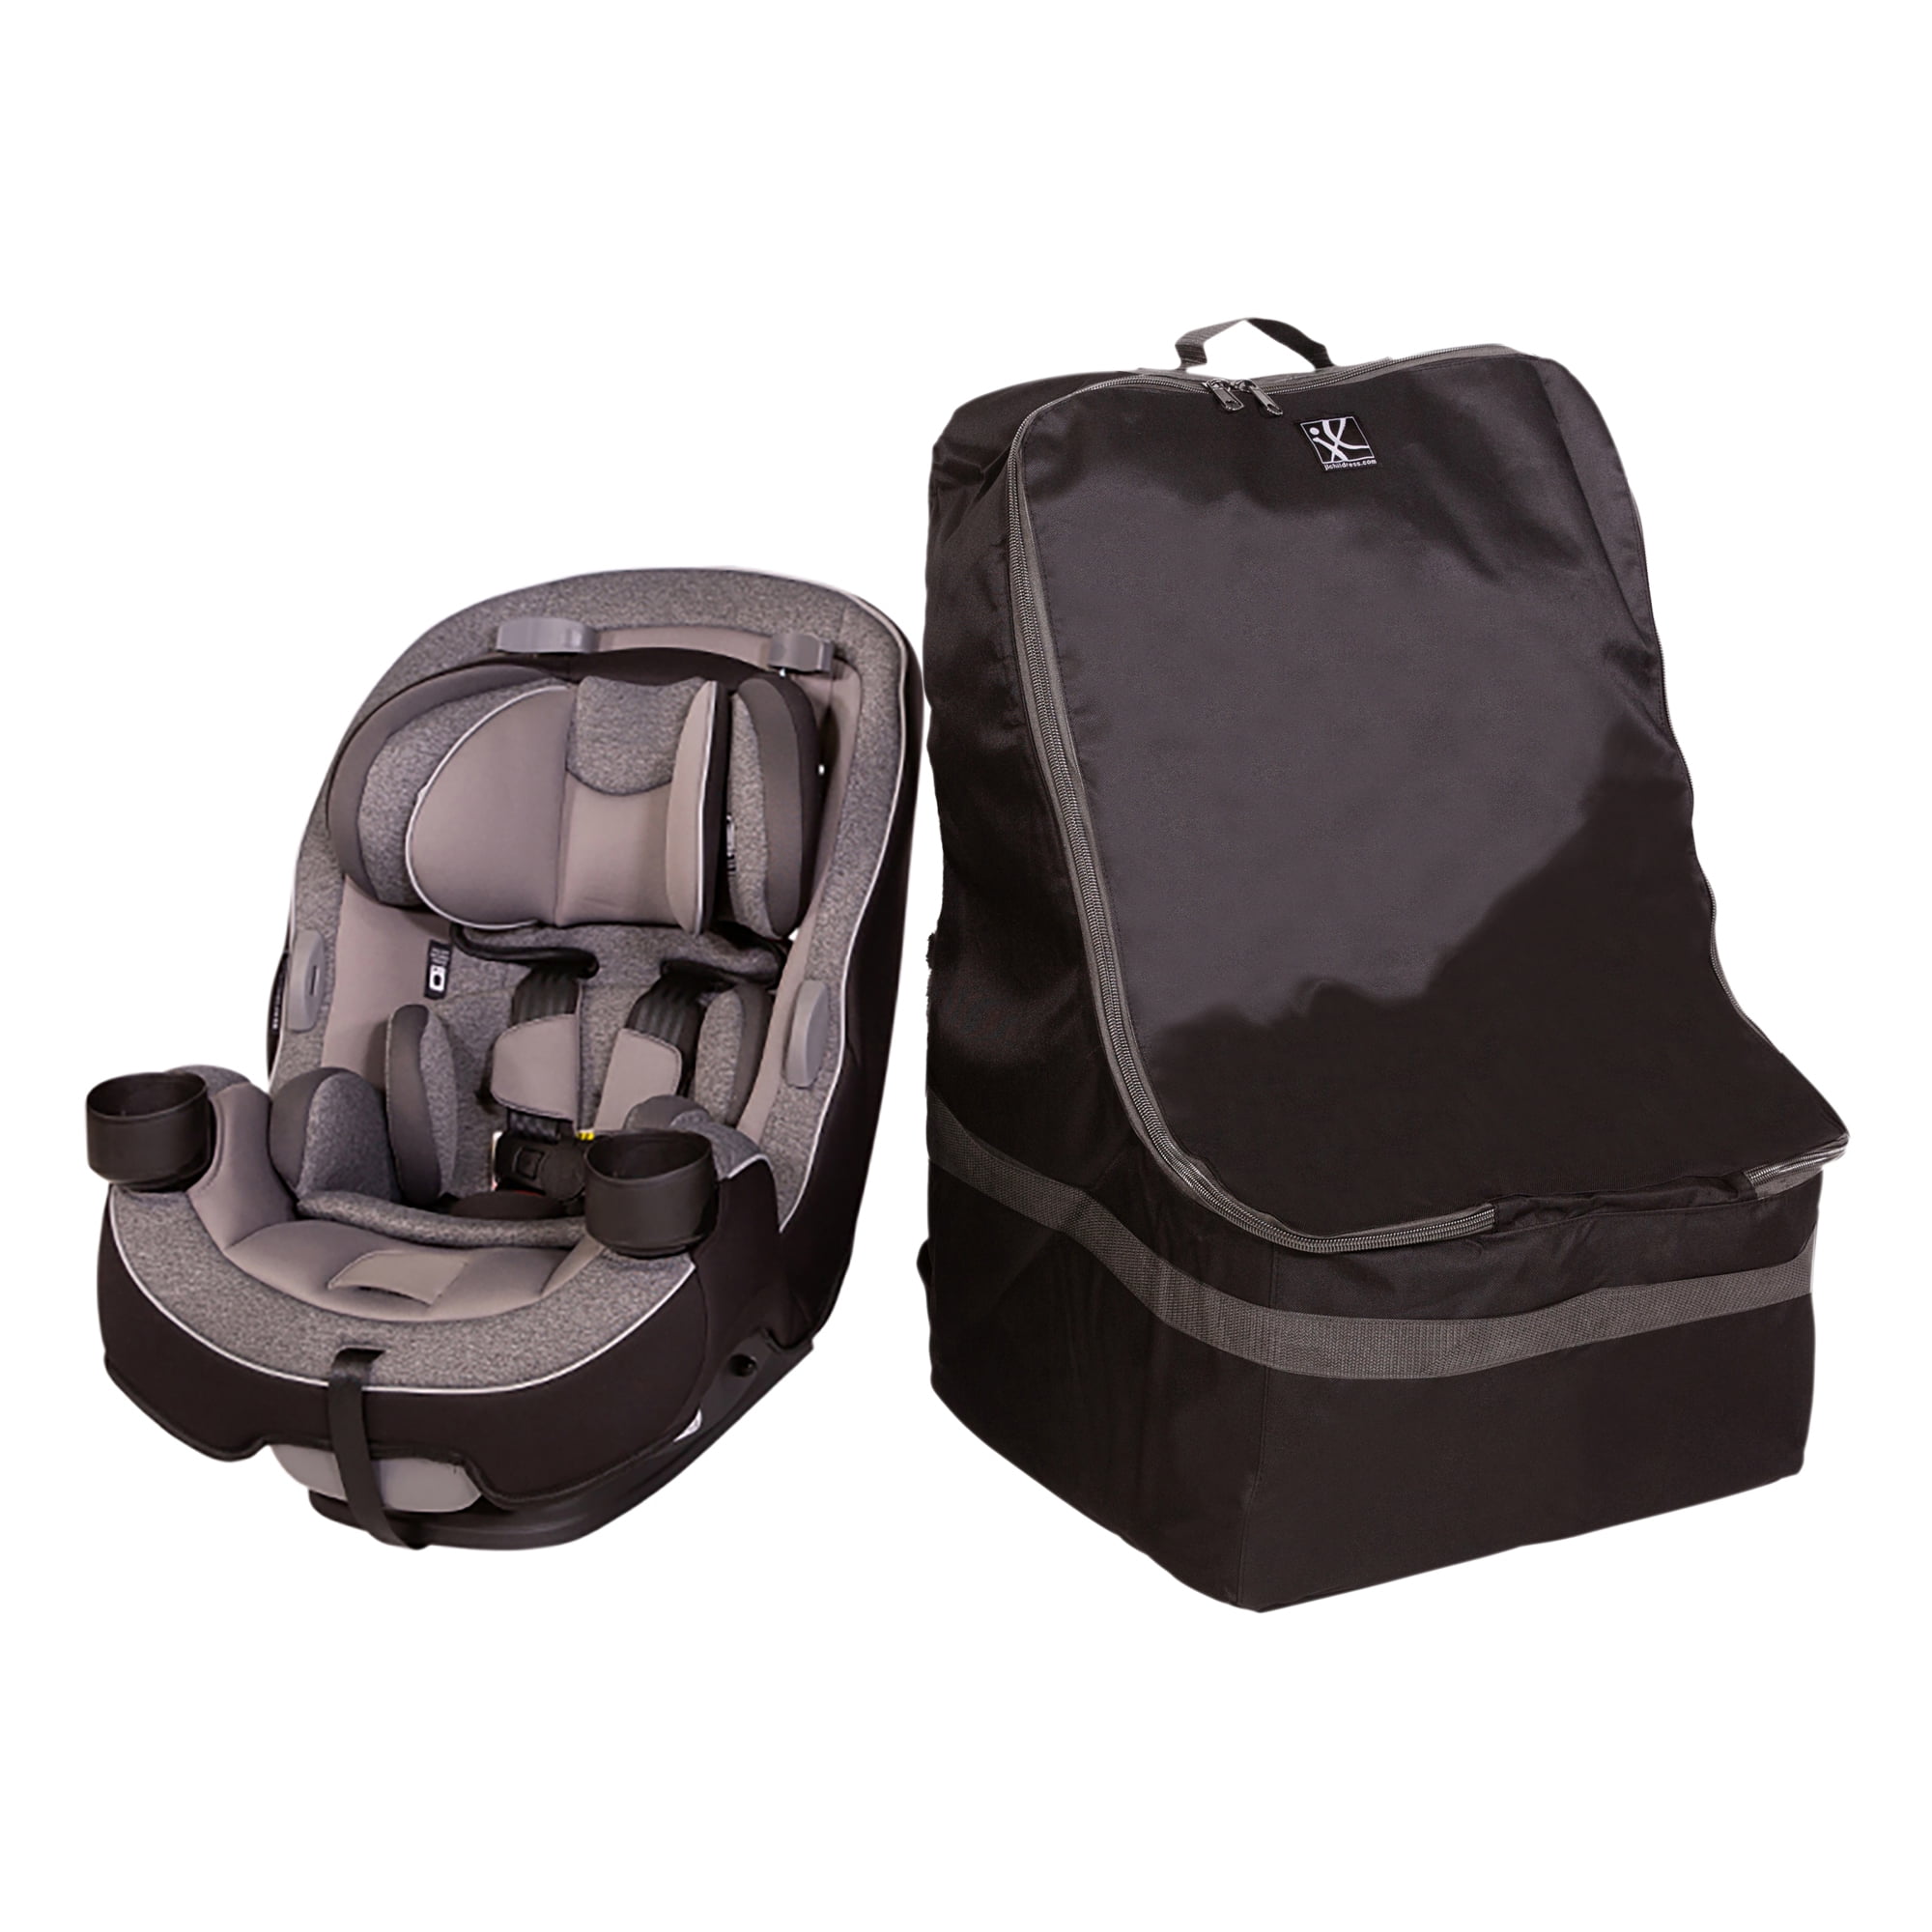 Amazon.com: The Little Stork Car Seat Travel Bag With Wheels - 3 In 1  Padded Carseat Carrier Backpack With Extra Storage To Cover All Your  Toddler Airplane Travel Essentials - Baby Car